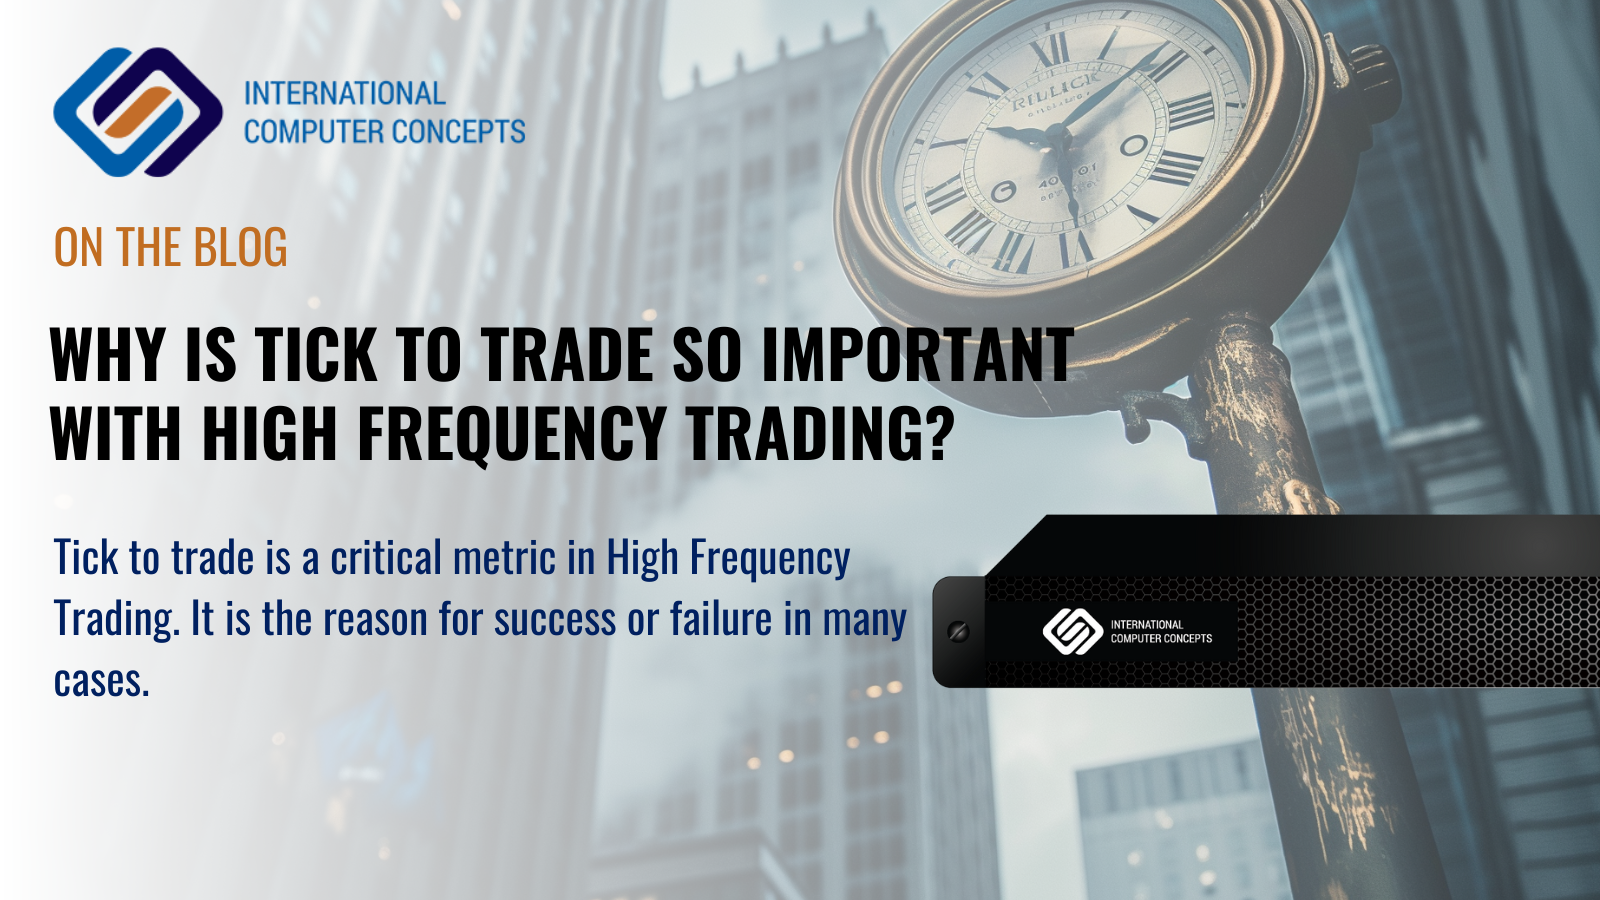 Why is tick to trade so important with High Frequency Trading?